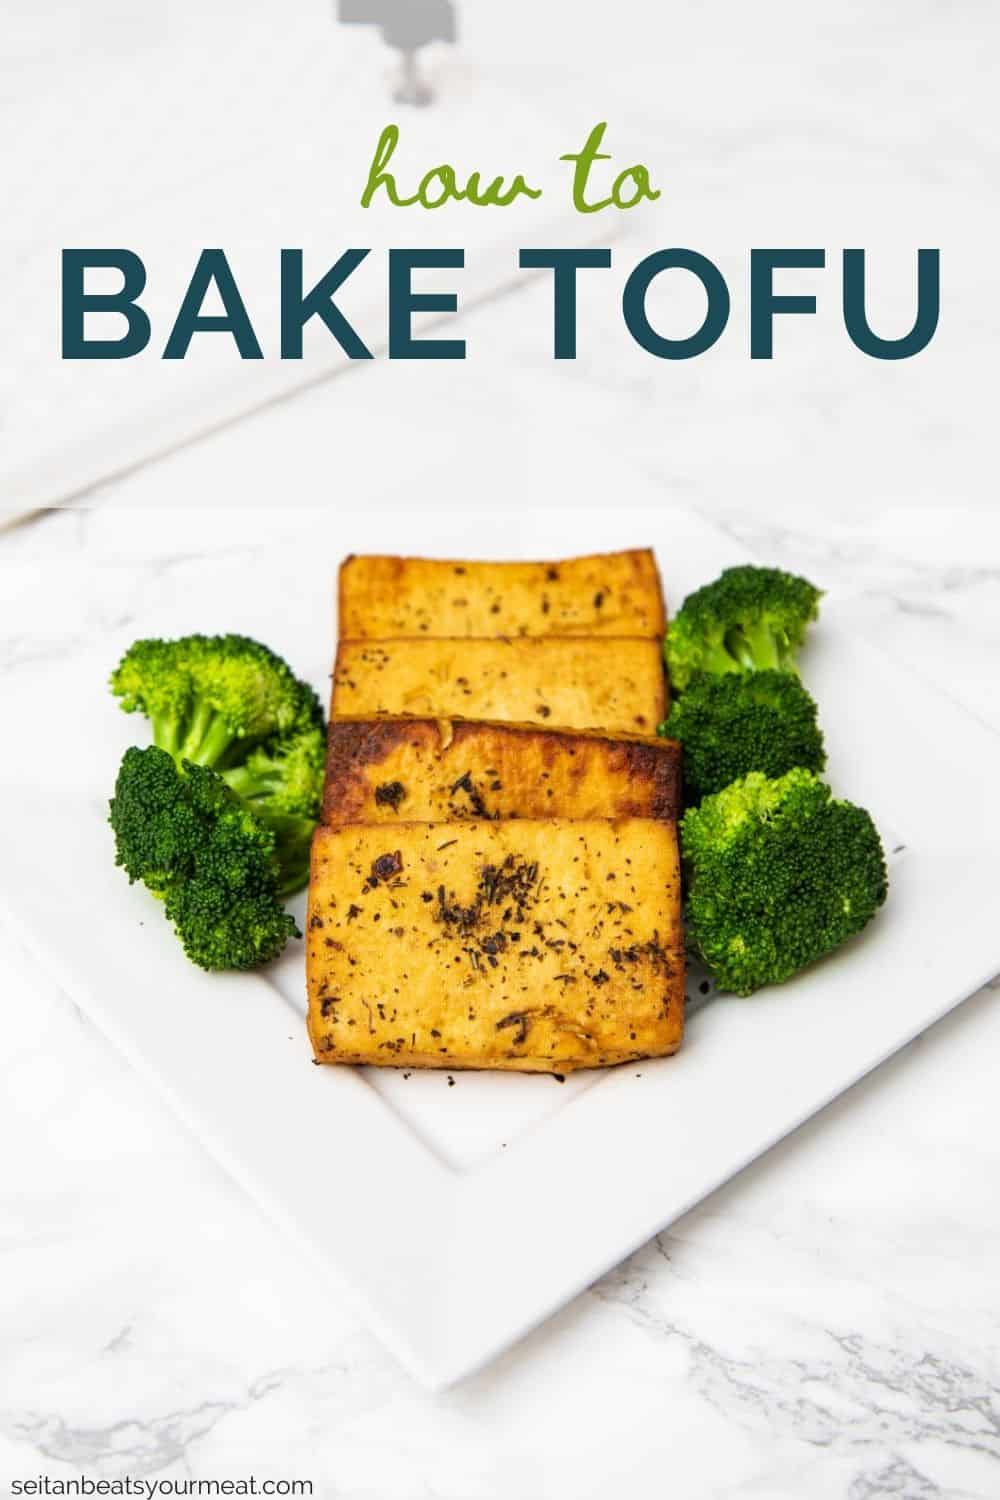 Plate with baked tofu pieces and broccoli with text "How to Bake Tofu"